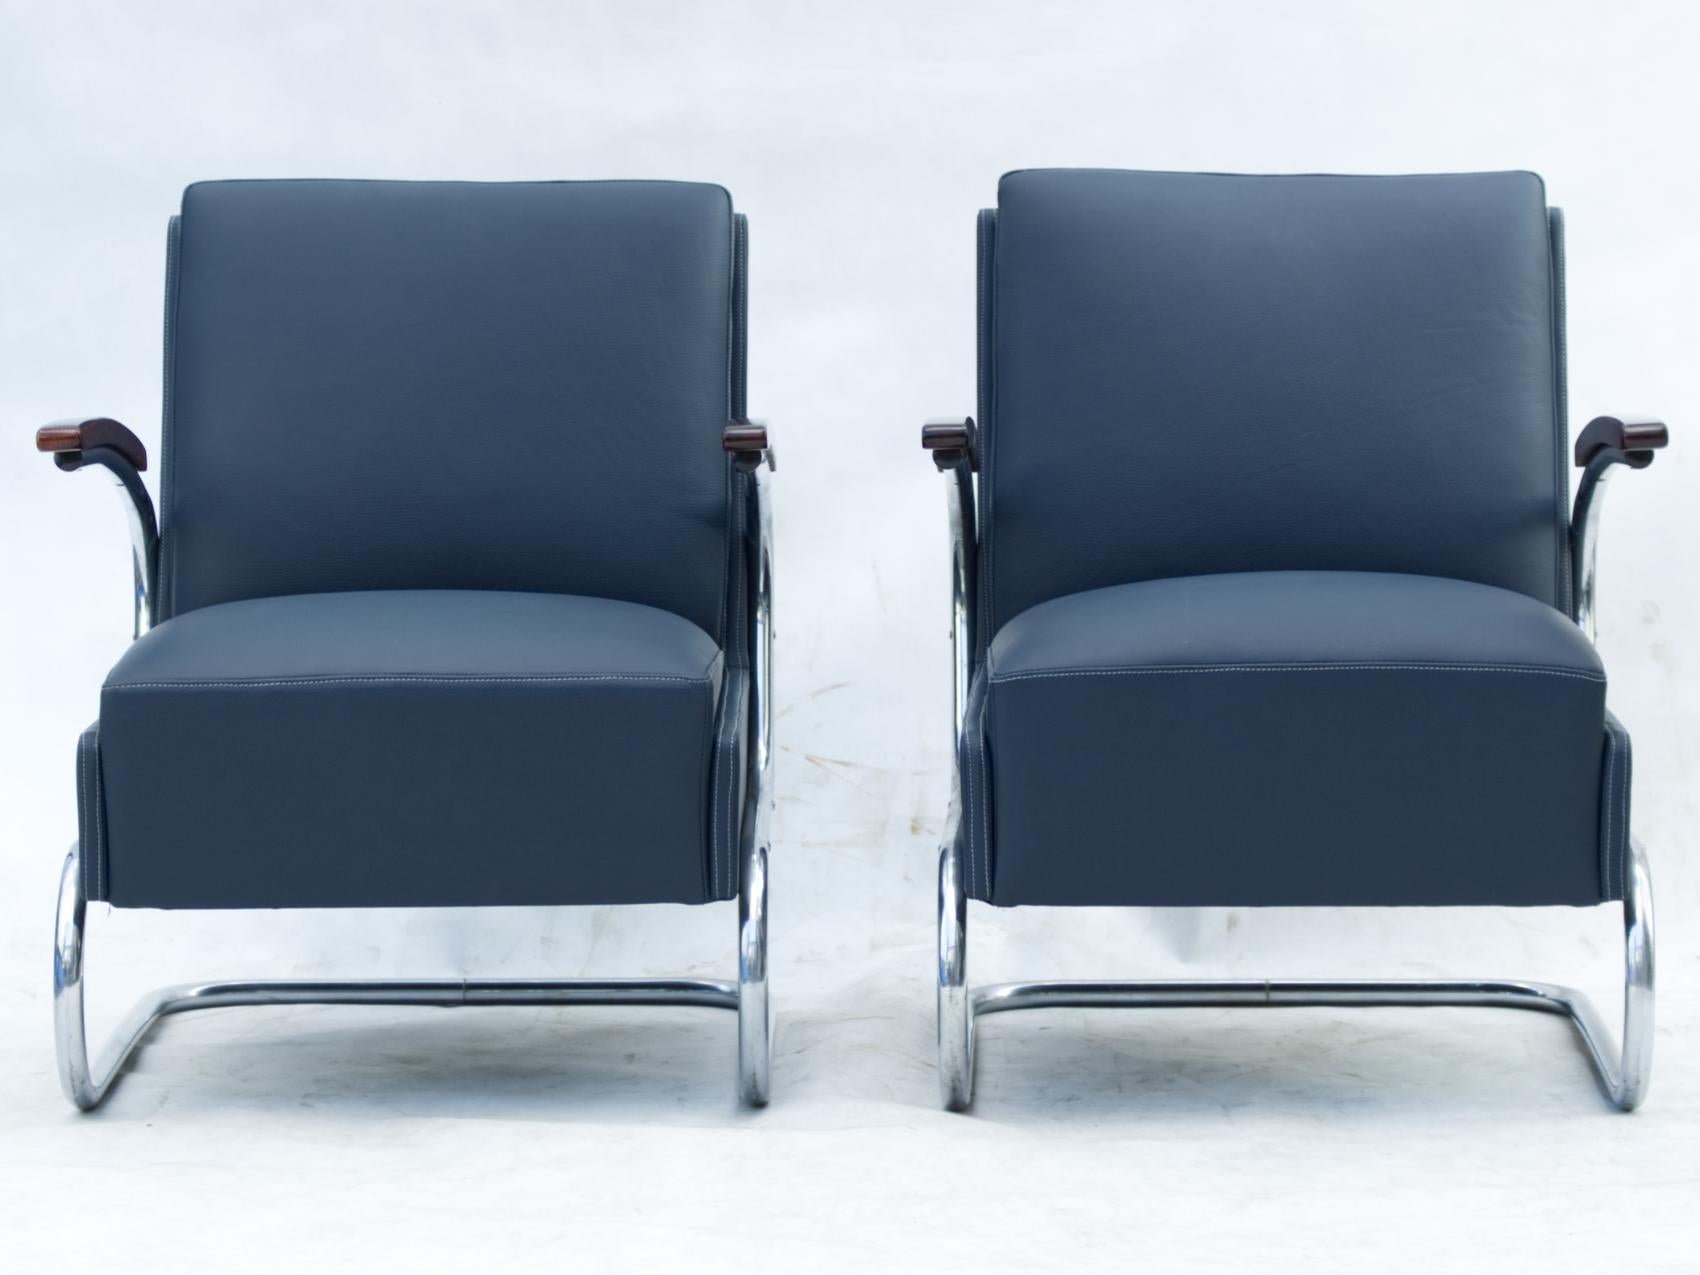 Armchairs model Fn 24 by Mücke & Melder, Czechoslovakia, circa 1930s Bauhaus period. New blue natural cow leather upholstery. Nickel-plated tubular steel construction is in a good original condition. 3 pieces available.
Price for 2 pieces.

   